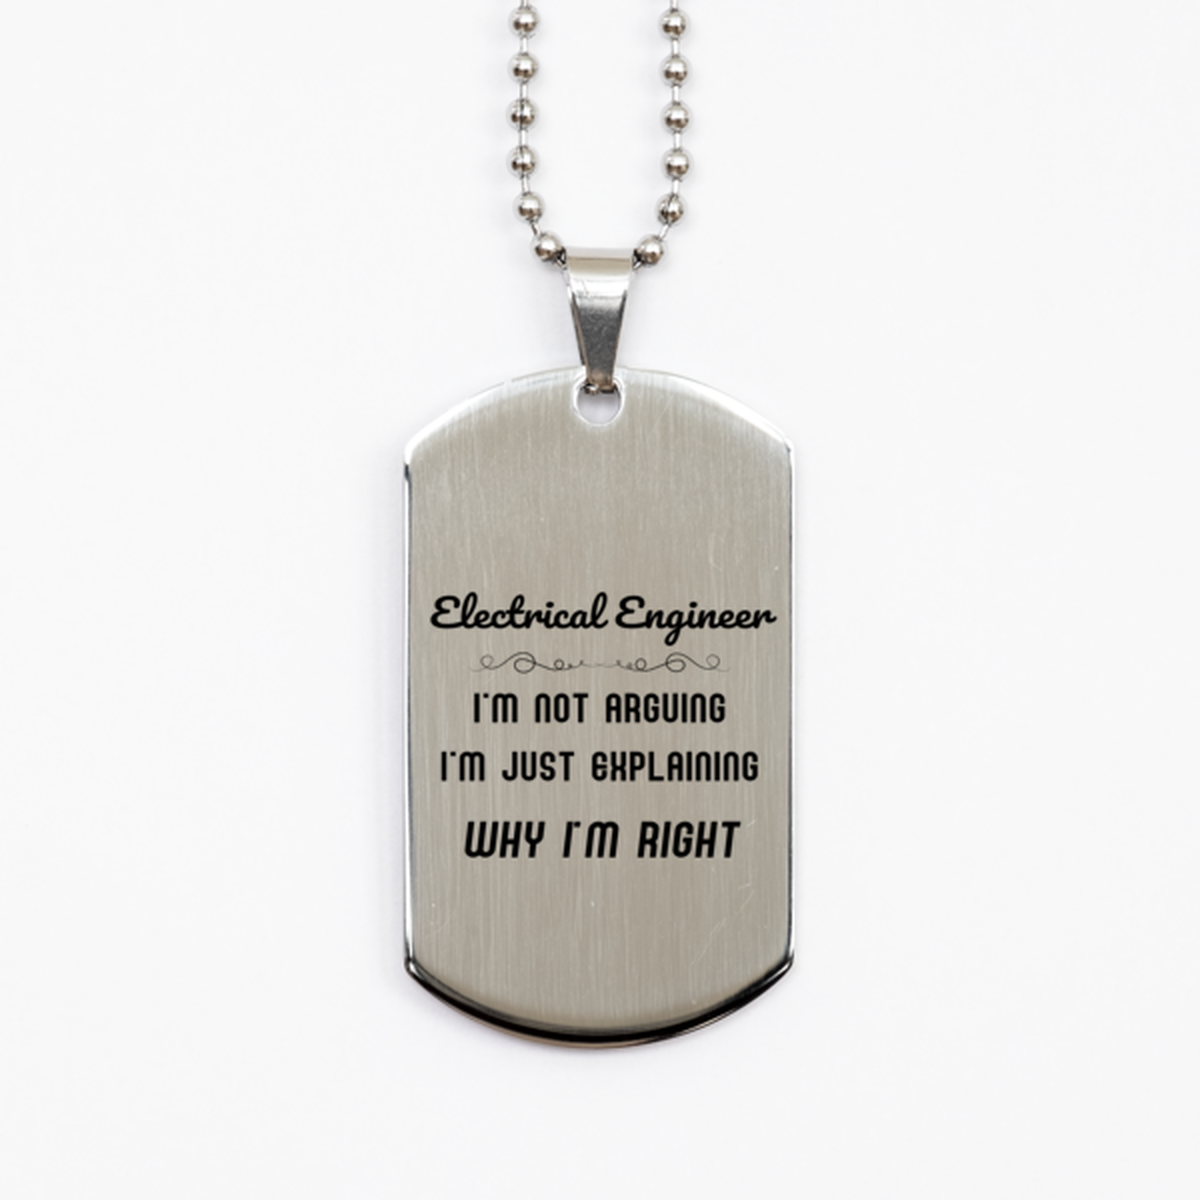 Electrical Engineer I'm not Arguing. I'm Just Explaining Why I'm RIGHT Silver Dog Tag, Funny Saying Quote Electrical Engineer Gifts For Electrical Engineer Graduation Birthday Christmas Gifts for Men Women Coworker